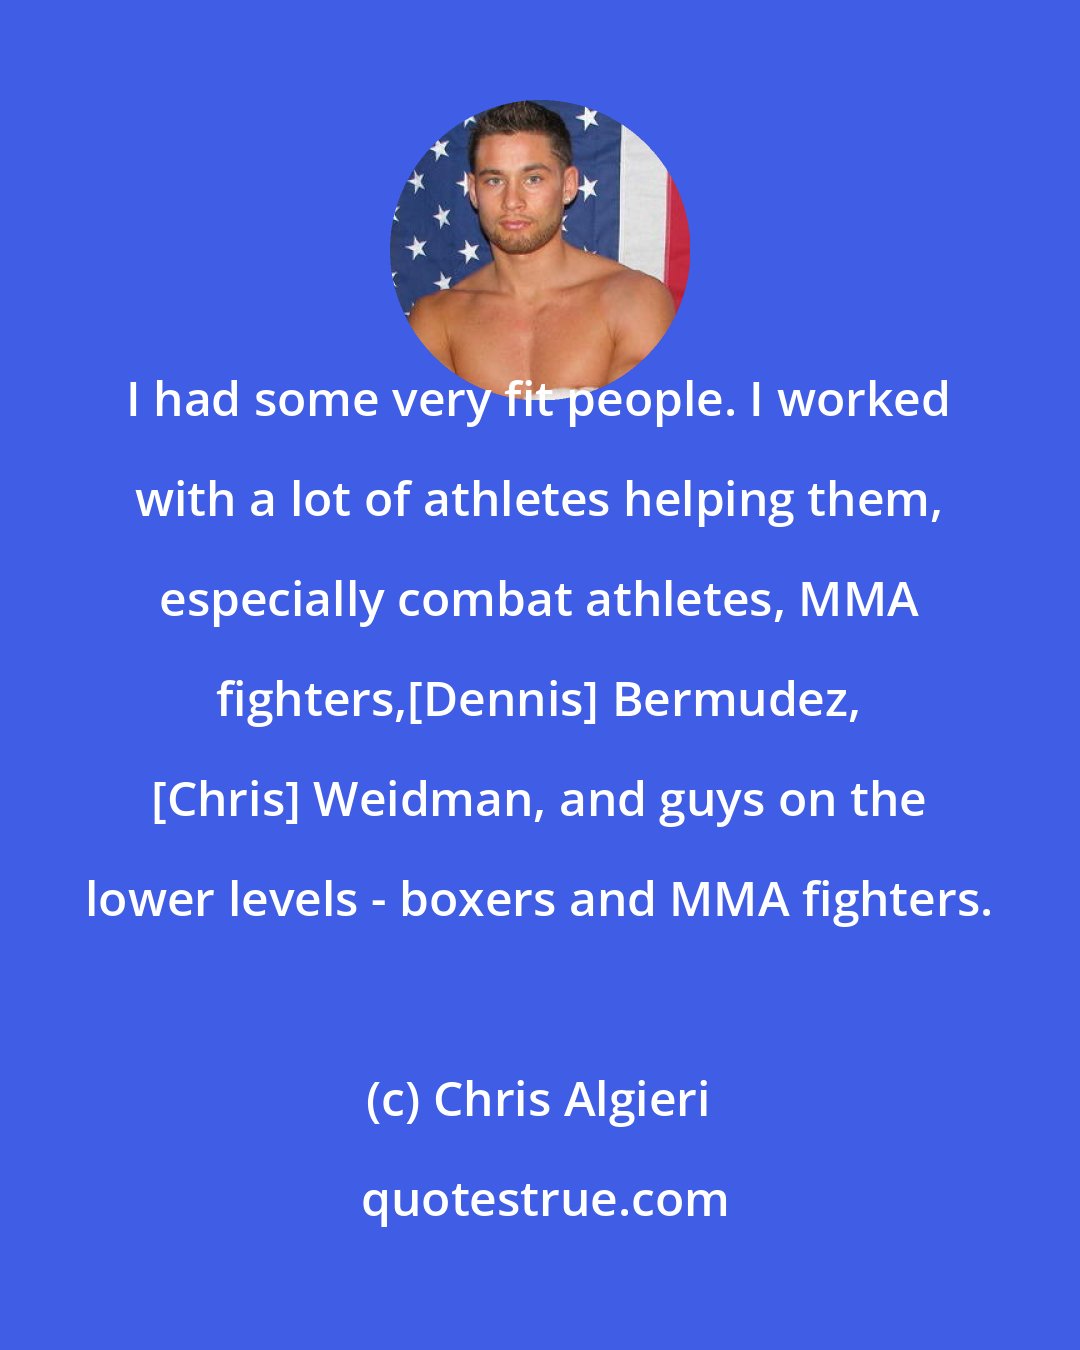 Chris Algieri: I had some very fit people. I worked with a lot of athletes helping them, especially combat athletes, MMA fighters,[Dennis] Bermudez, [Chris] Weidman, and guys on the lower levels - boxers and MMA fighters.